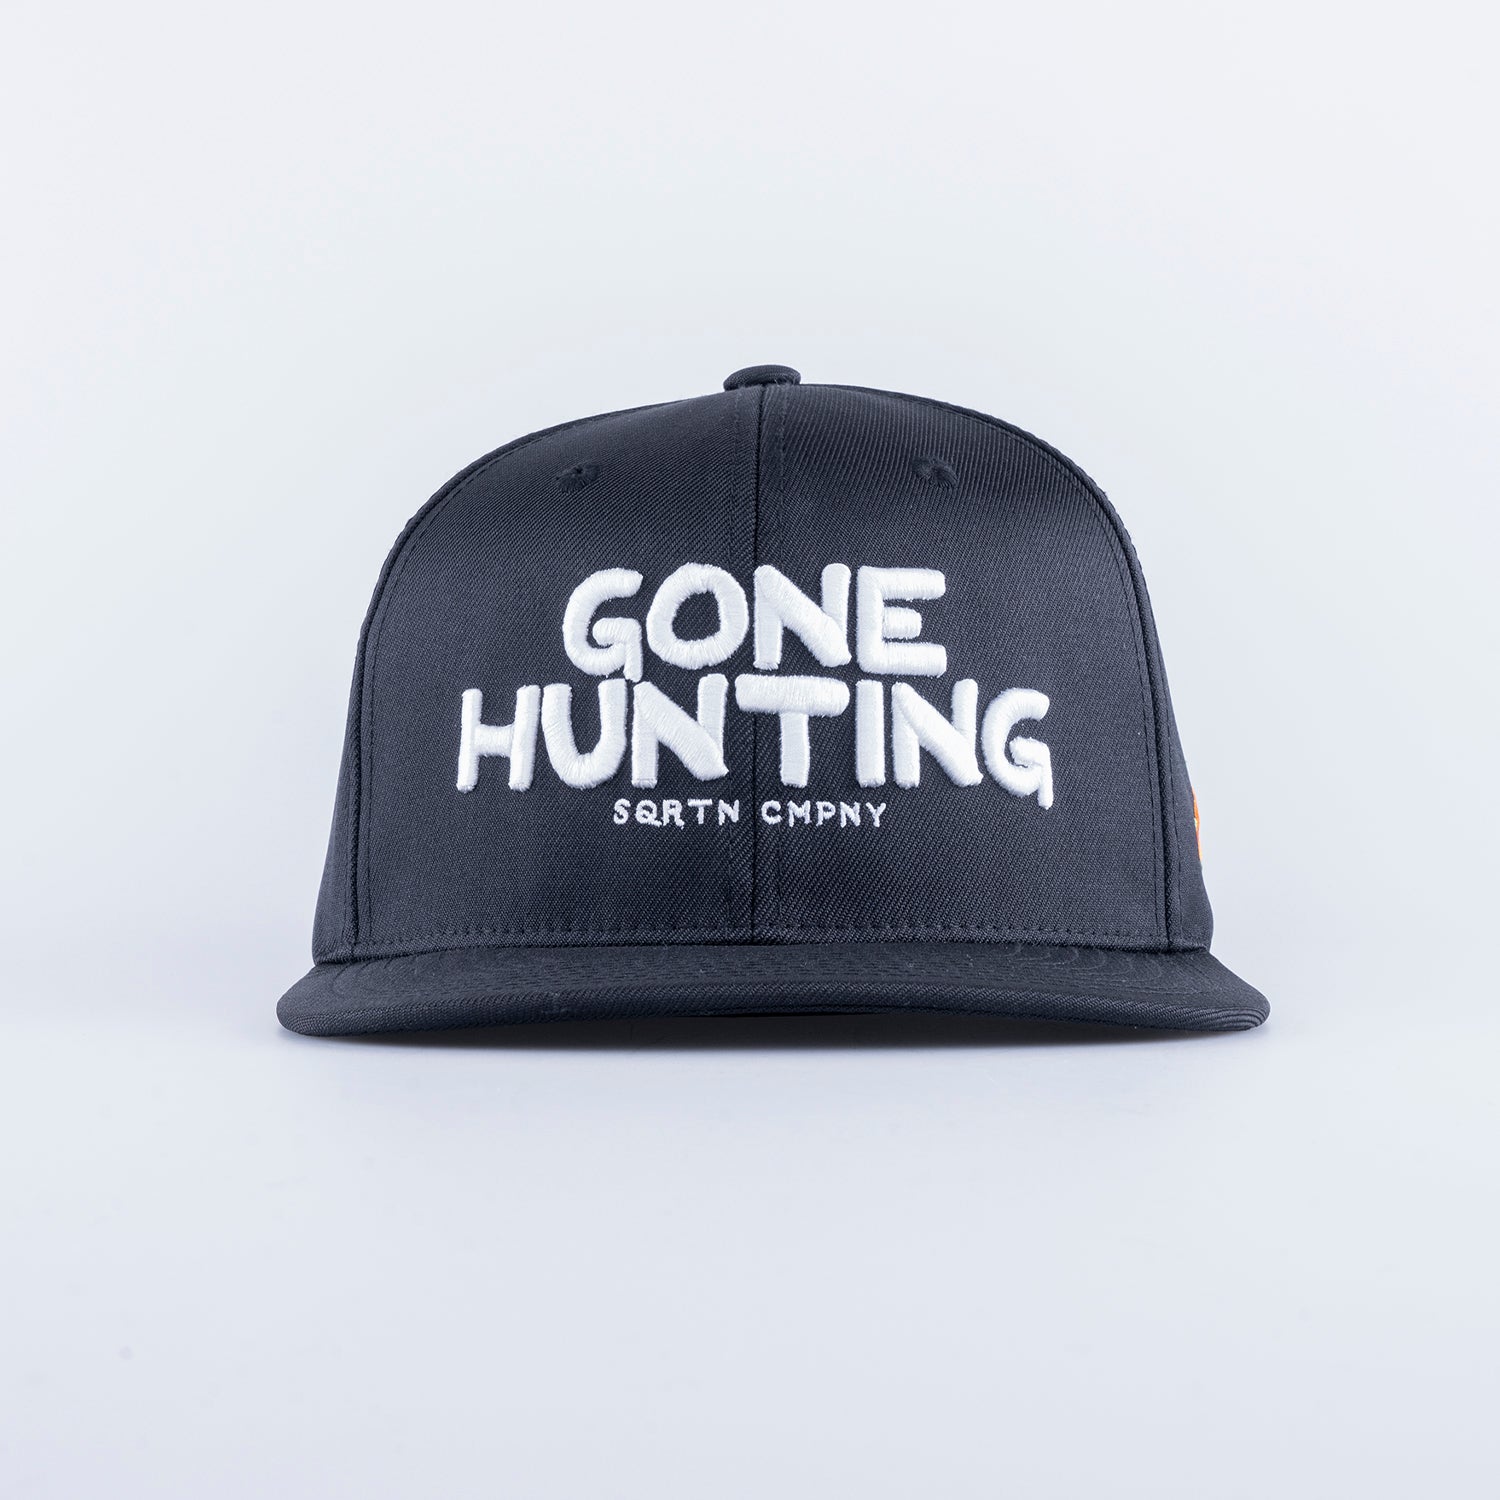 GONE HUNTING COMPACT KEPS - BLACK